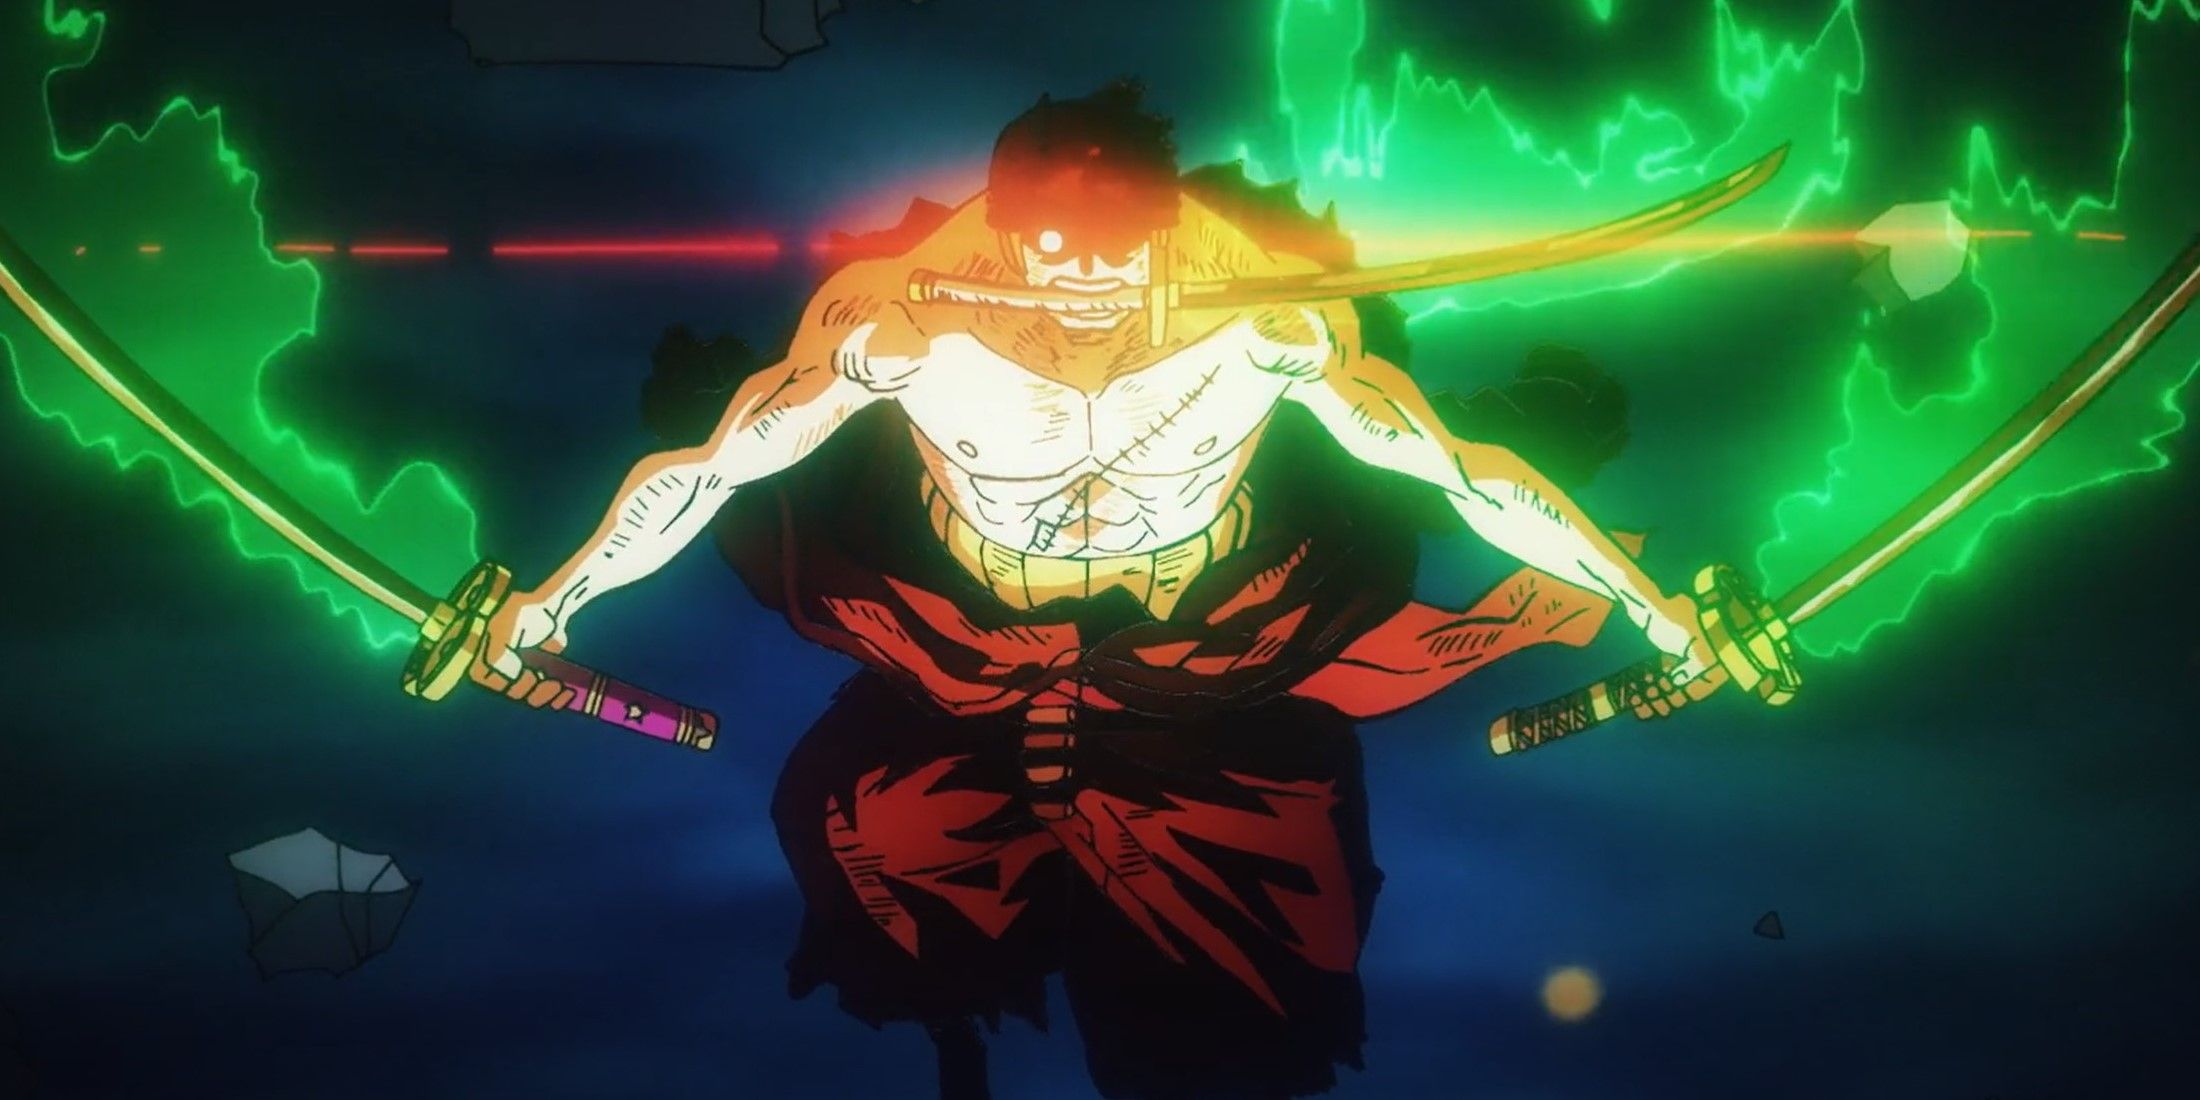 Zoro from One Piece, looking menacing, with three glowing swords.